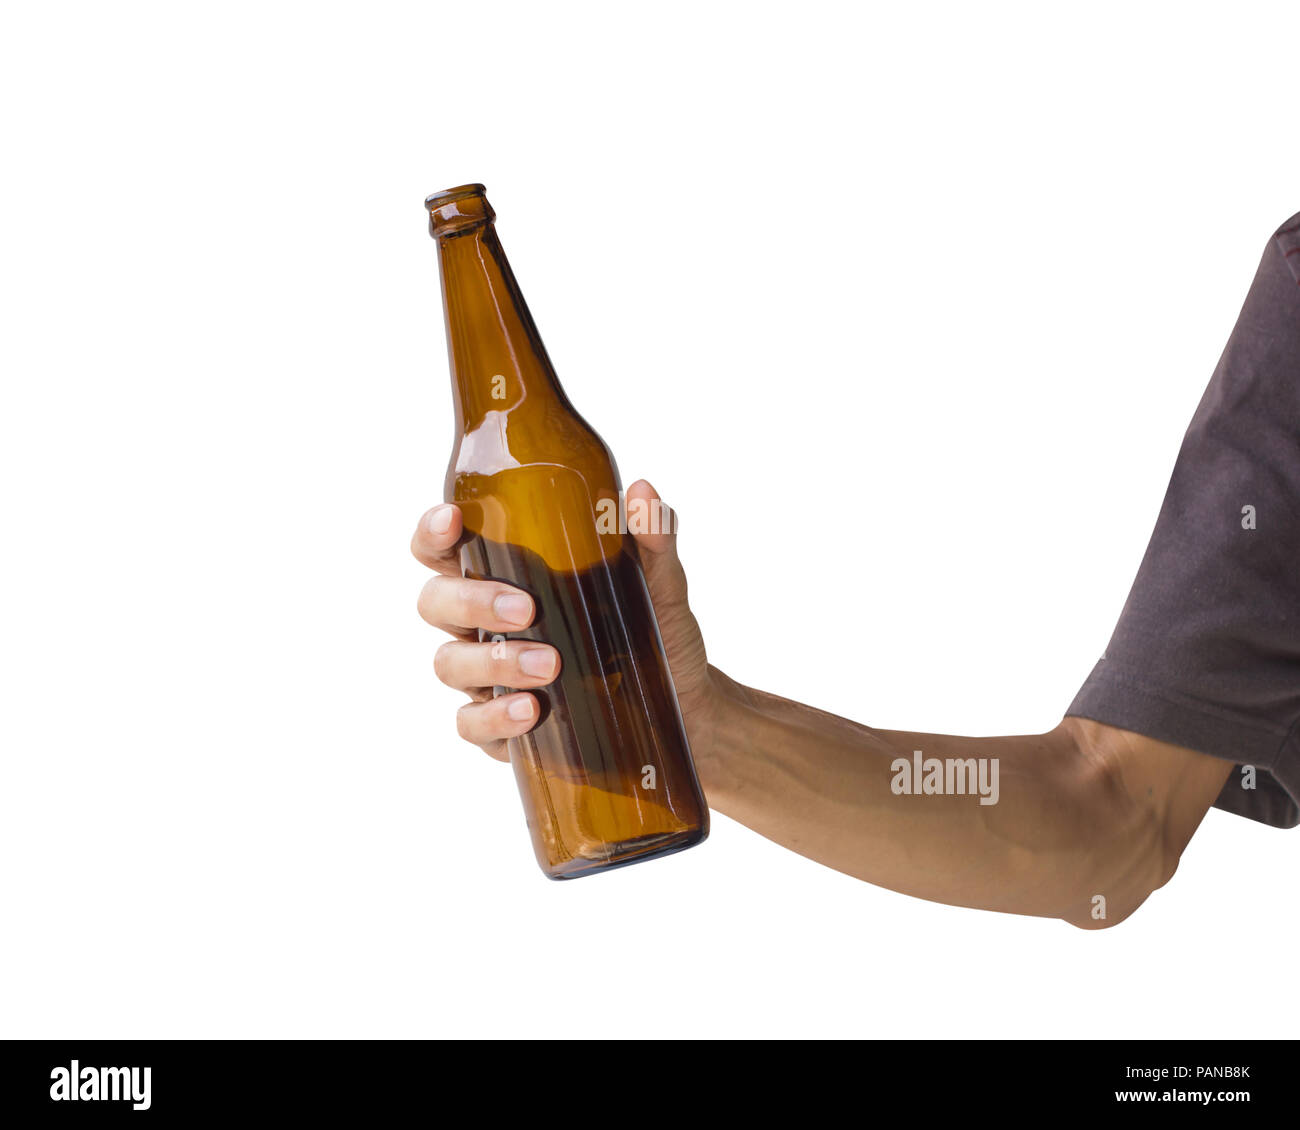 A man hand holding beer bottle isolated on white background. Clipping path of brown glass bottle on white background. Stock Photo